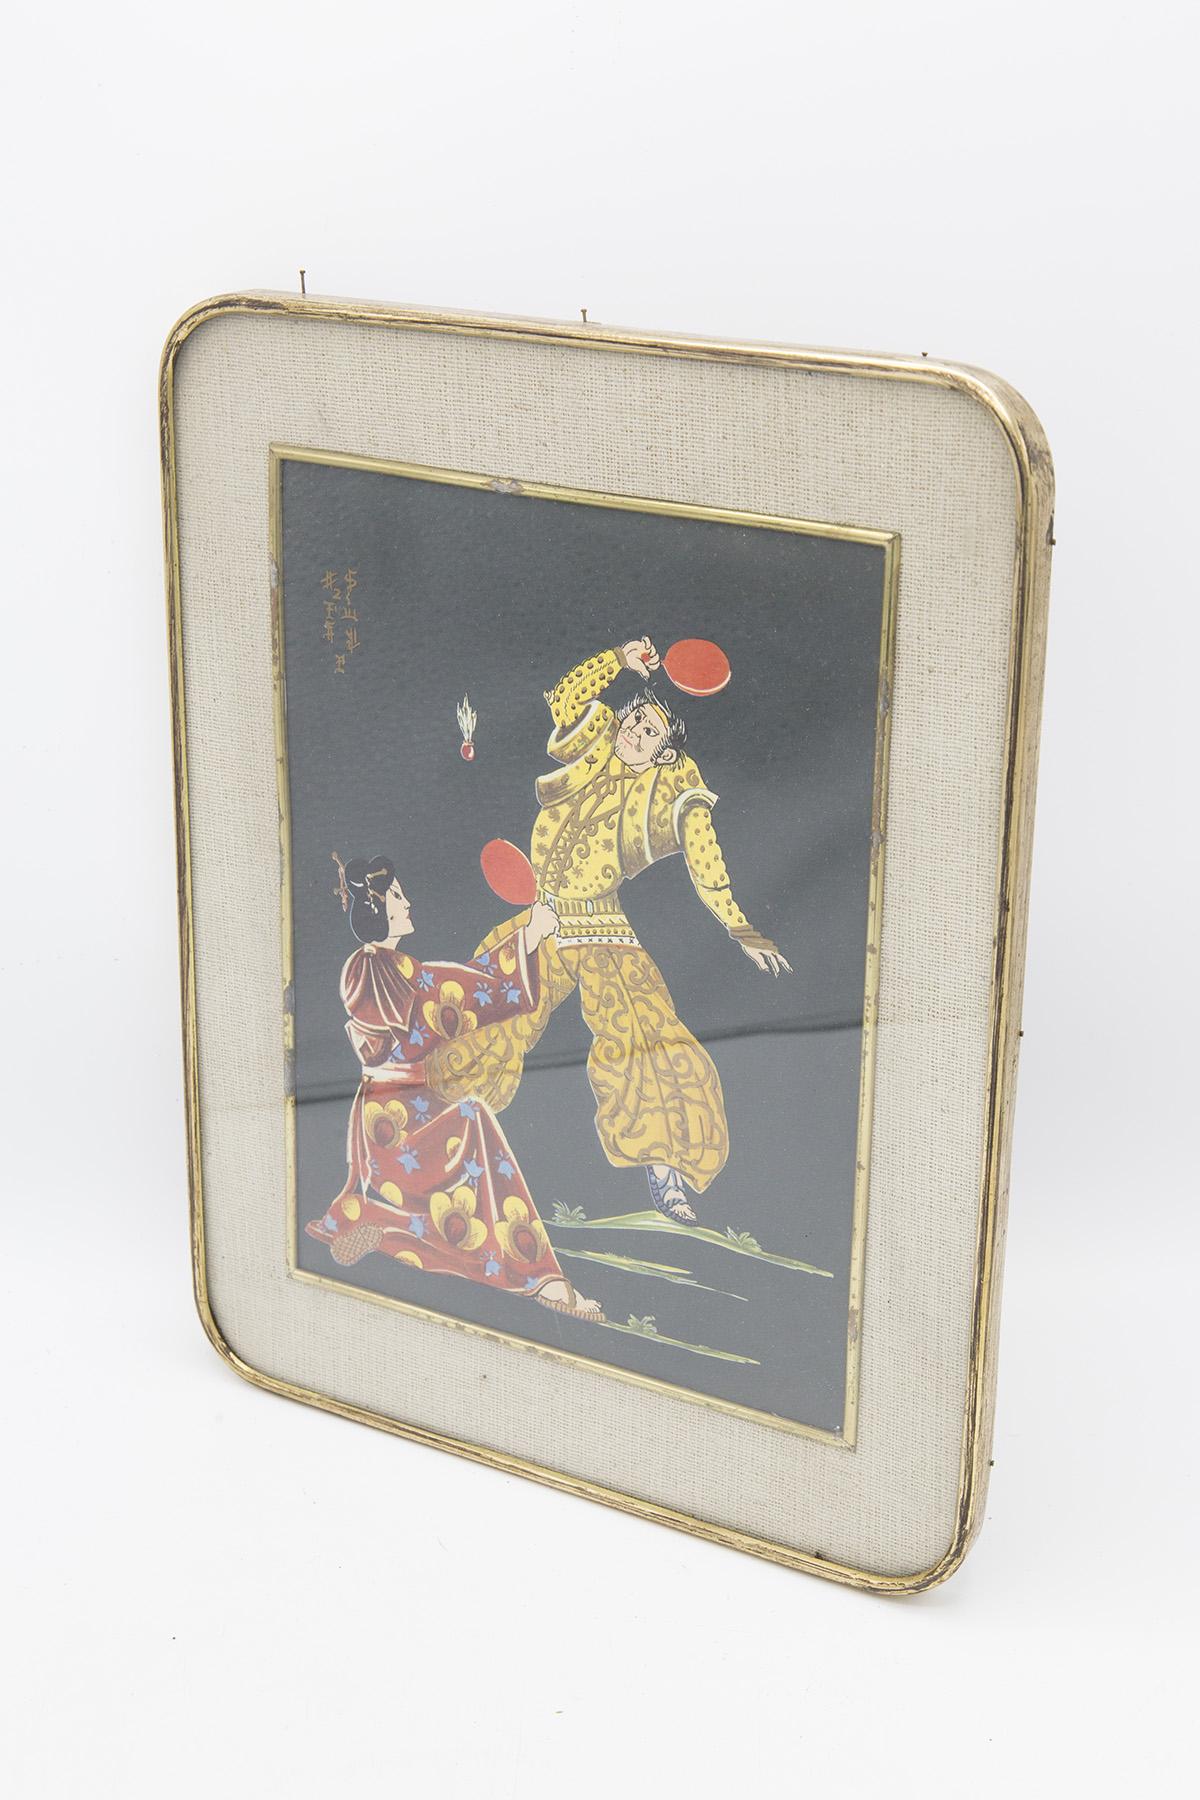 Hand-Painted Antique Japanese Framed Painting on Yuta 'Flywheel'